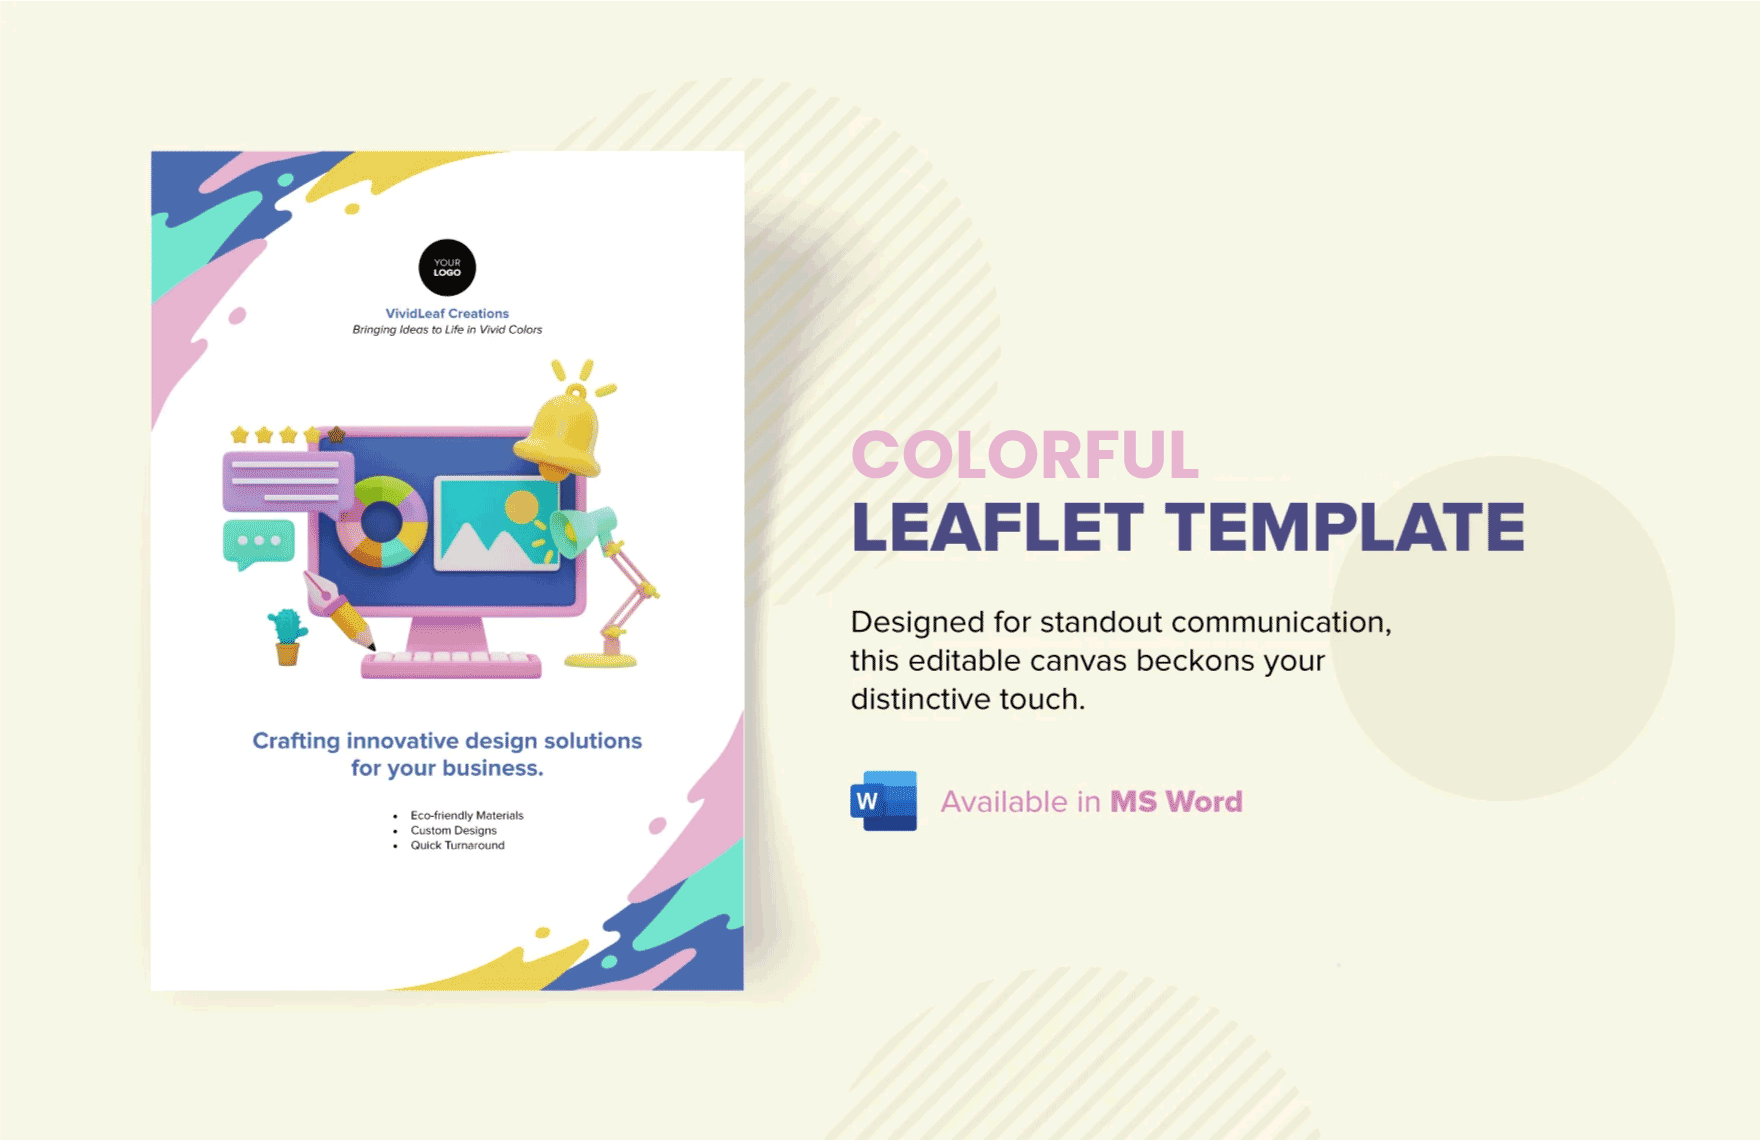 Colorful Leaflet Template